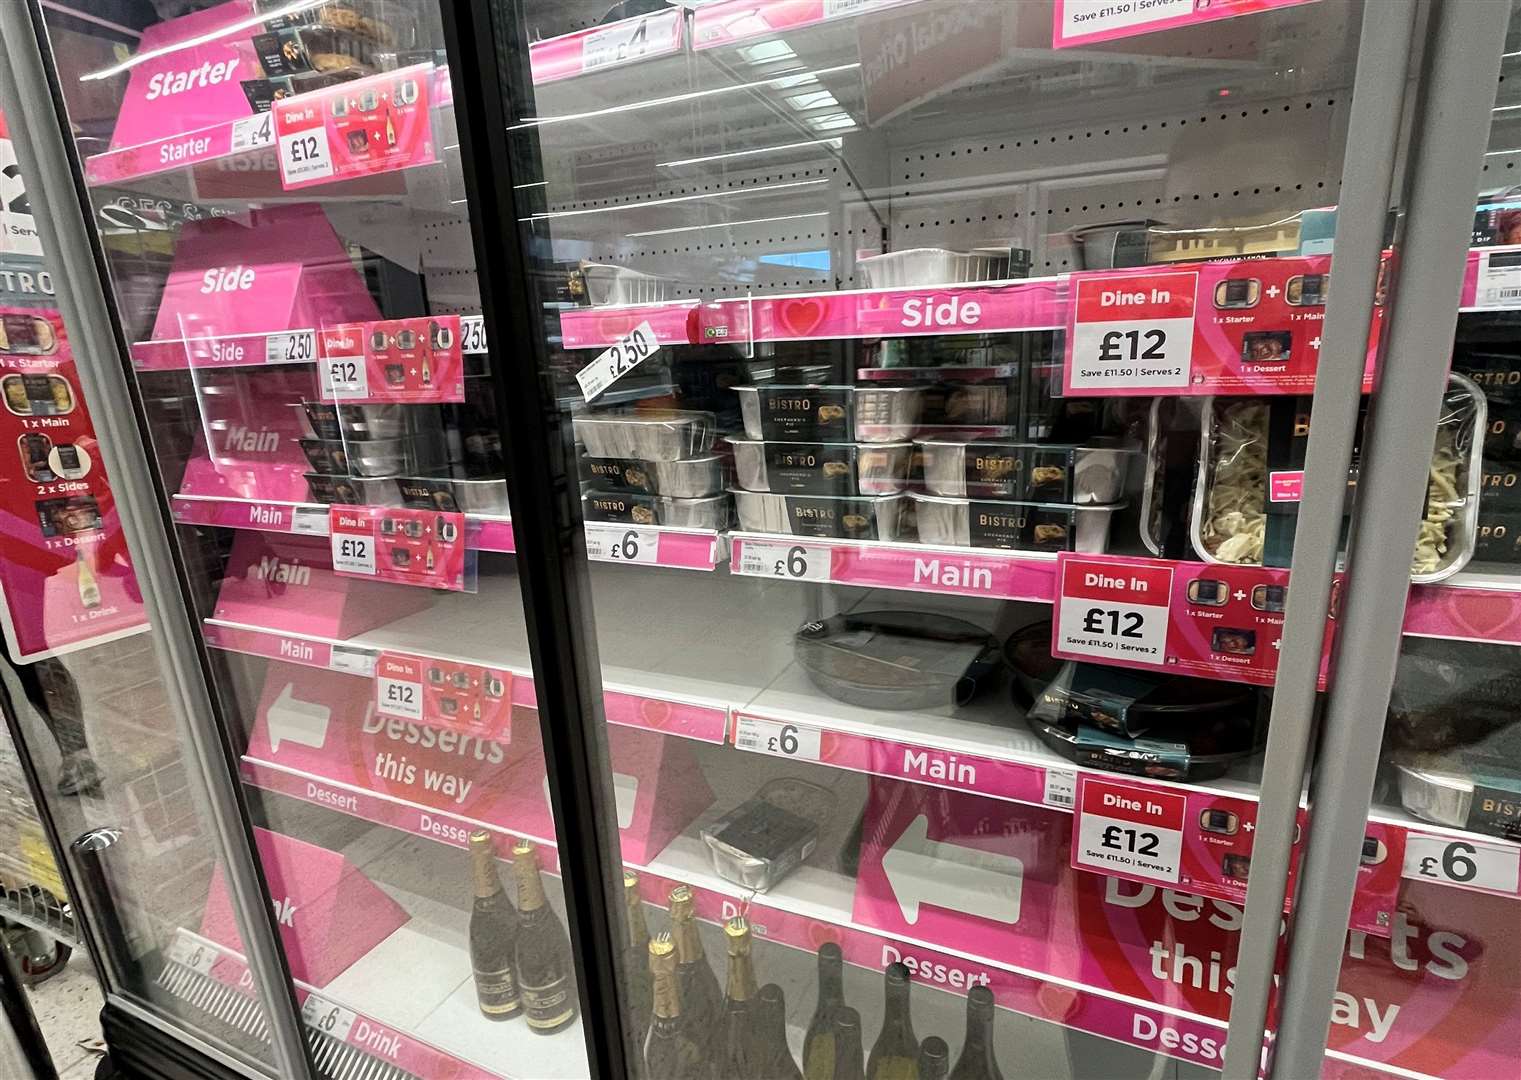 There had been a run on Valentine’s Day meals in Asda